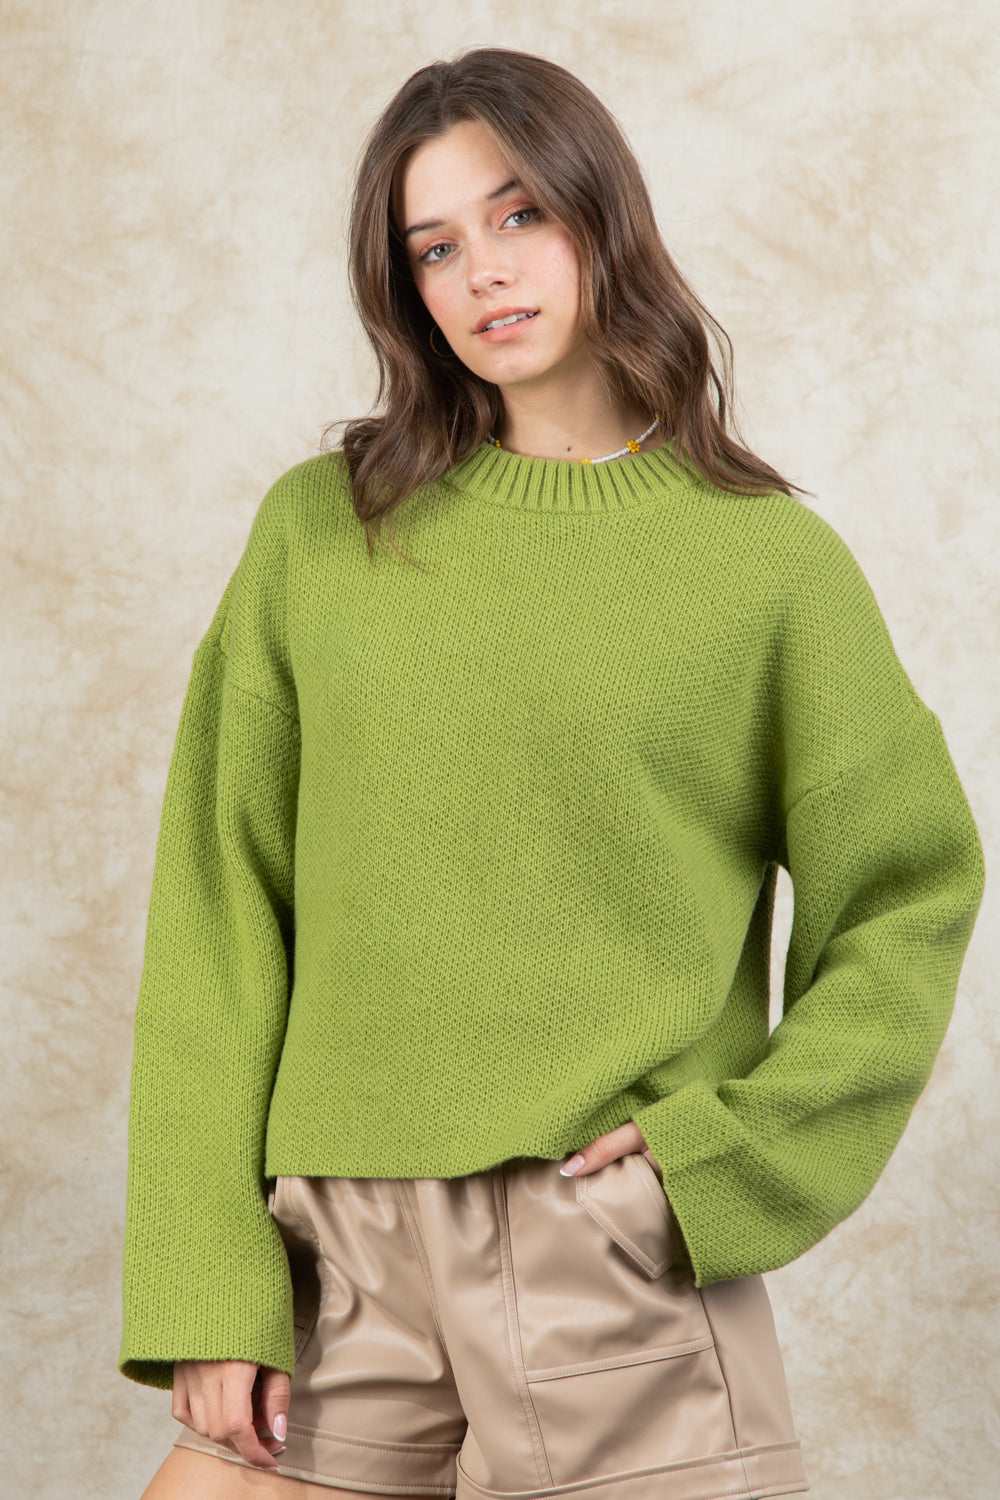 Avocado Oversized Solid Casual Sweater Top